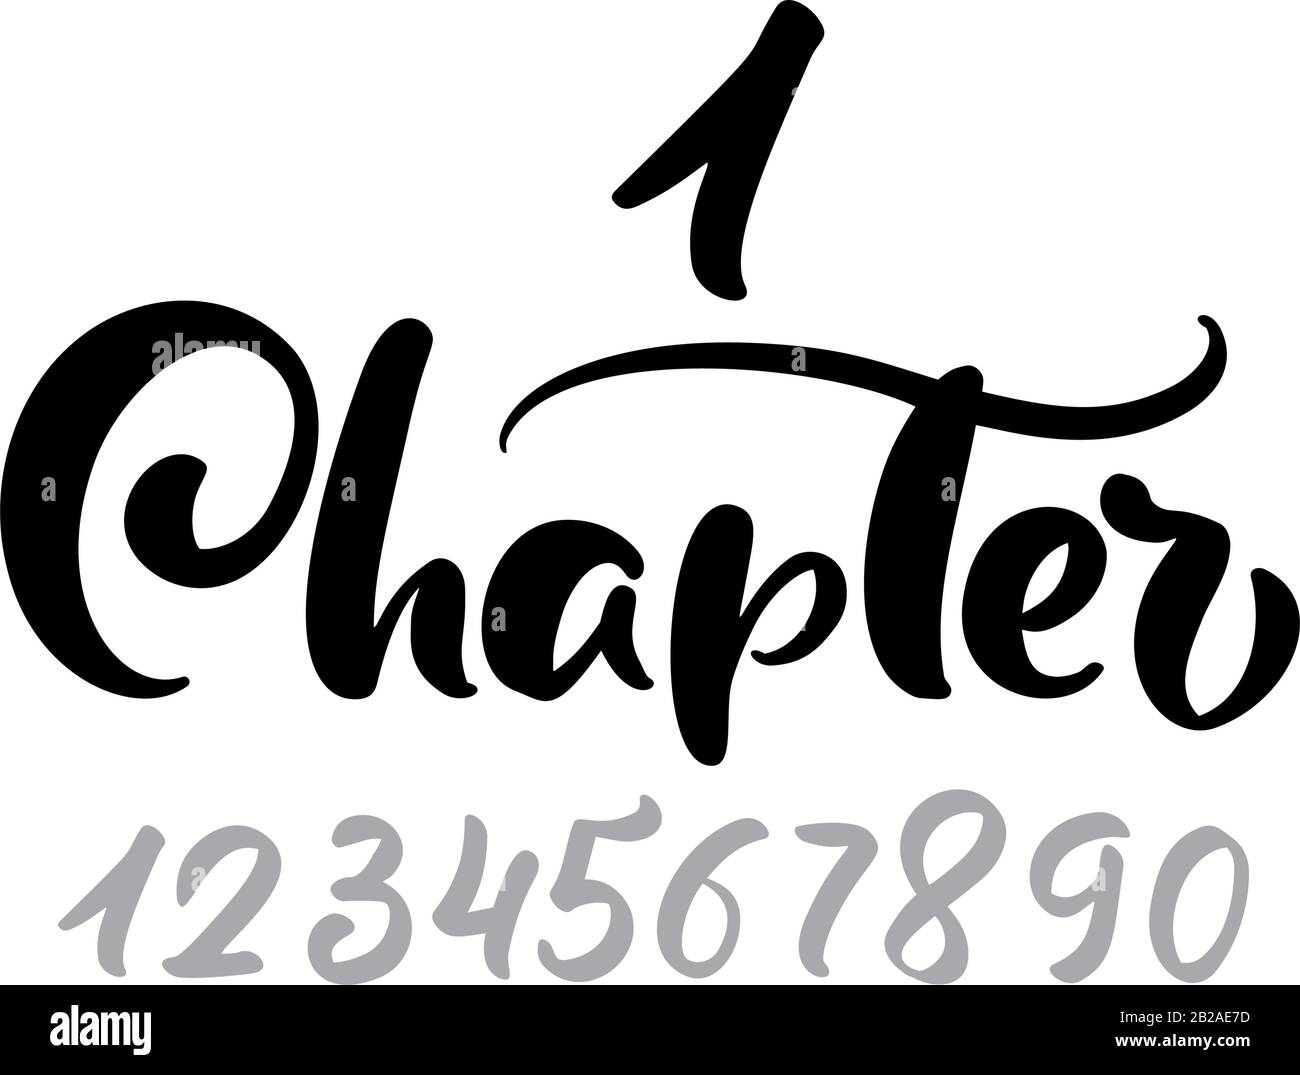 Chapter 1. One and other numbers. Calligraphy lettering hand drawn text. Flourish light vintage style for wedding book, romantic or drama book Stock Vector